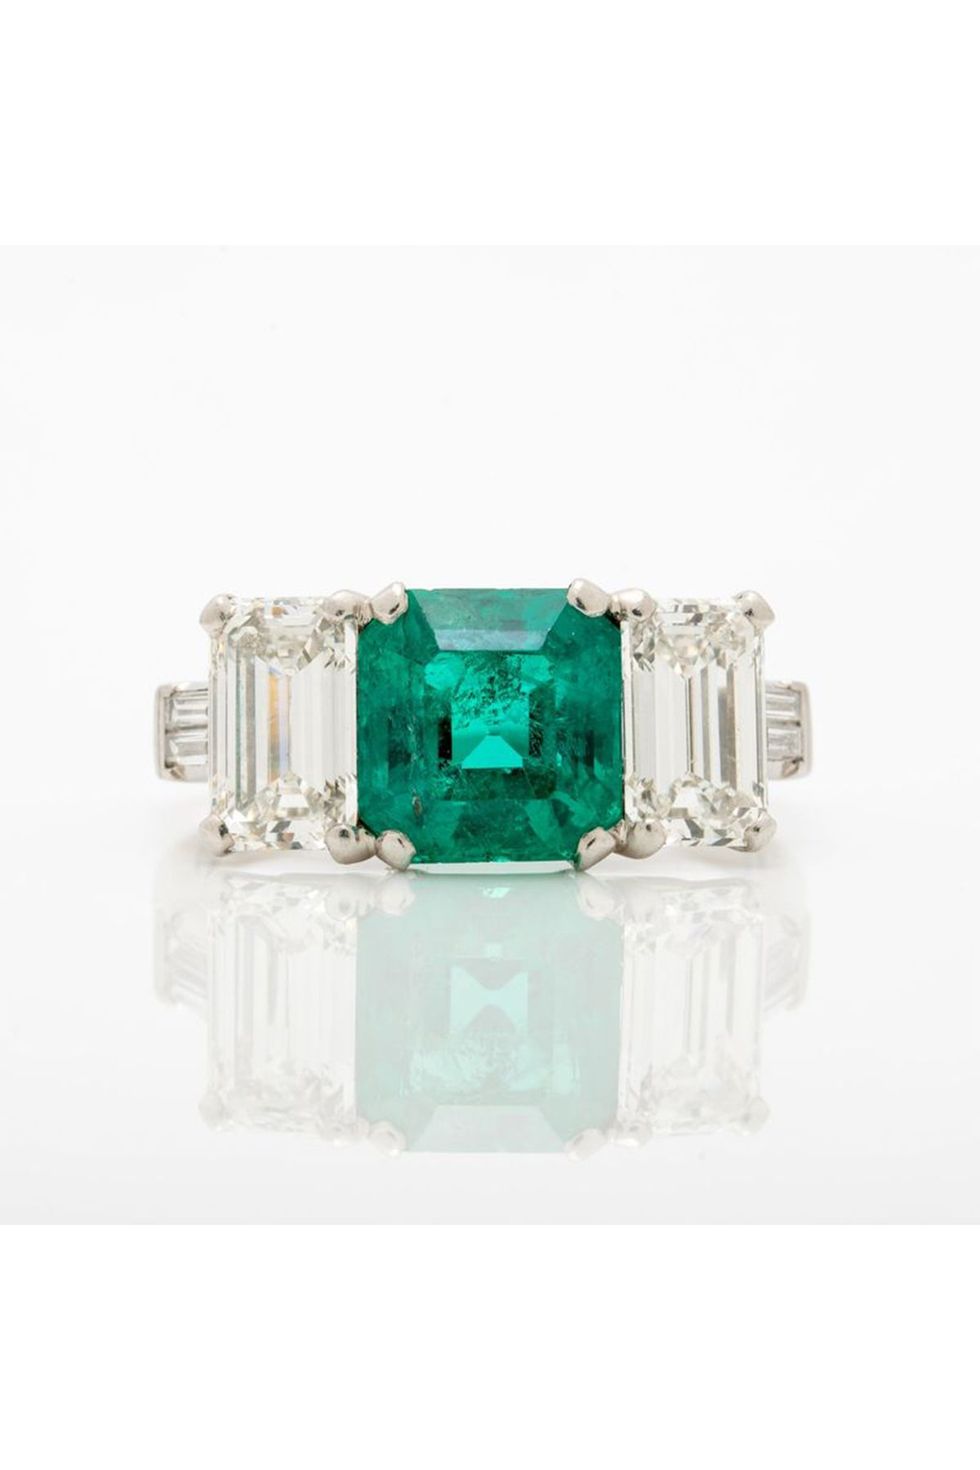 Vintage Platinum 1.20ct Colombian Emerald and 1.10ct Emerald Cut Diamond Ring c.1950s